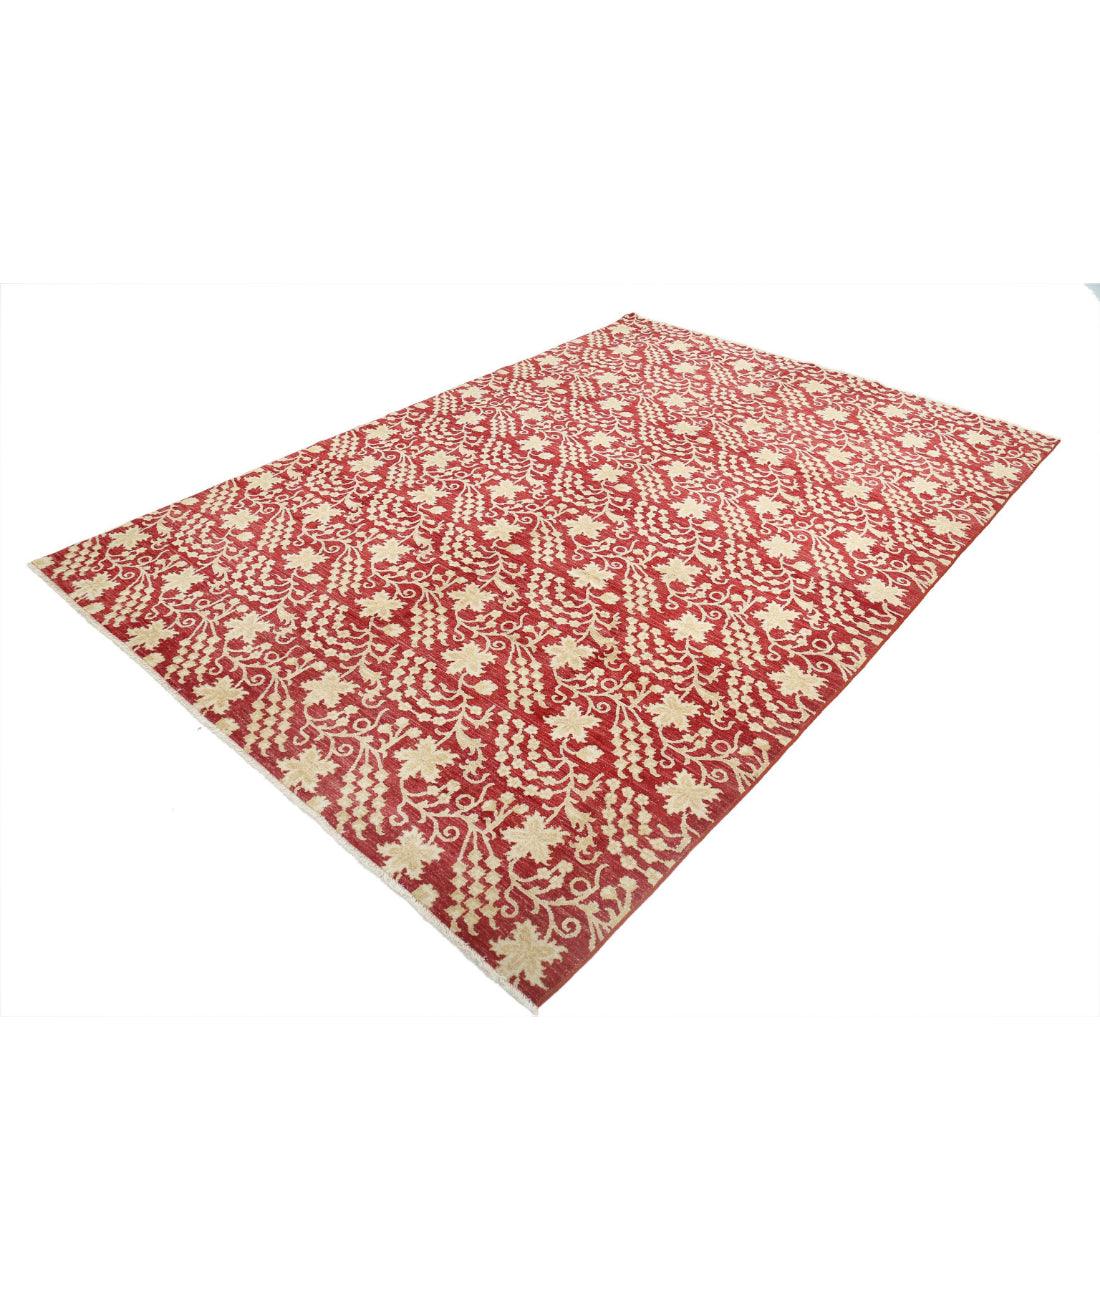 Hand Knotted Artemix Wool Rug - 6'7'' x 9'5'' 6'7'' x 9'5'' (198 X 283) / Red / Ivory